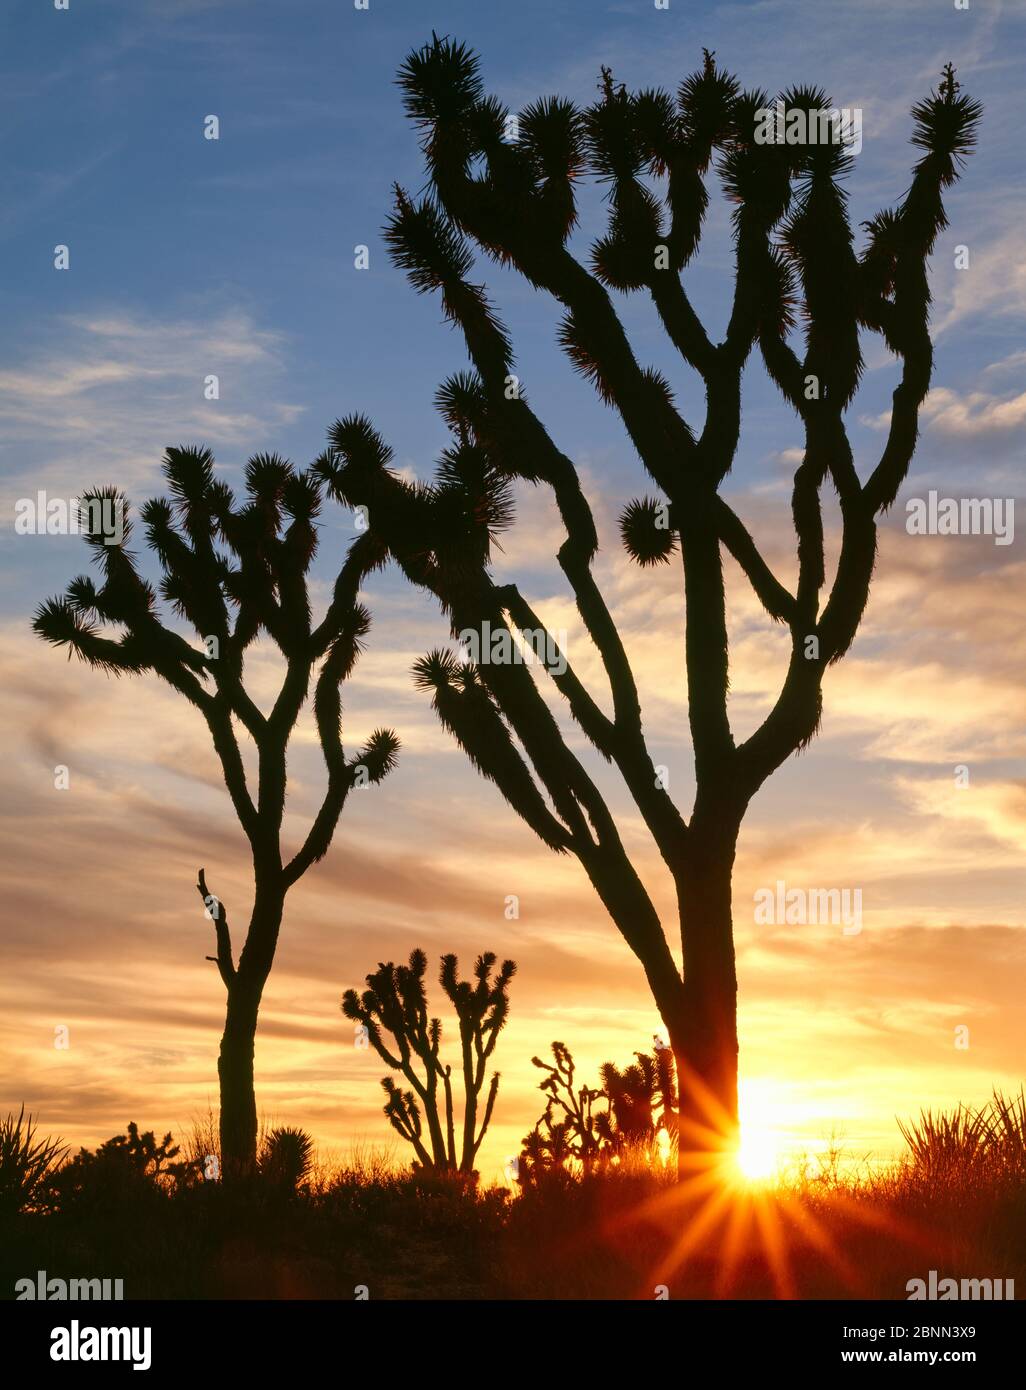 Joshua trees (Yucca brevifolia) silhouetted with the sun setting on the horizon. Mojave Trails National Monument. Preserve, California, USA. Stock Photo